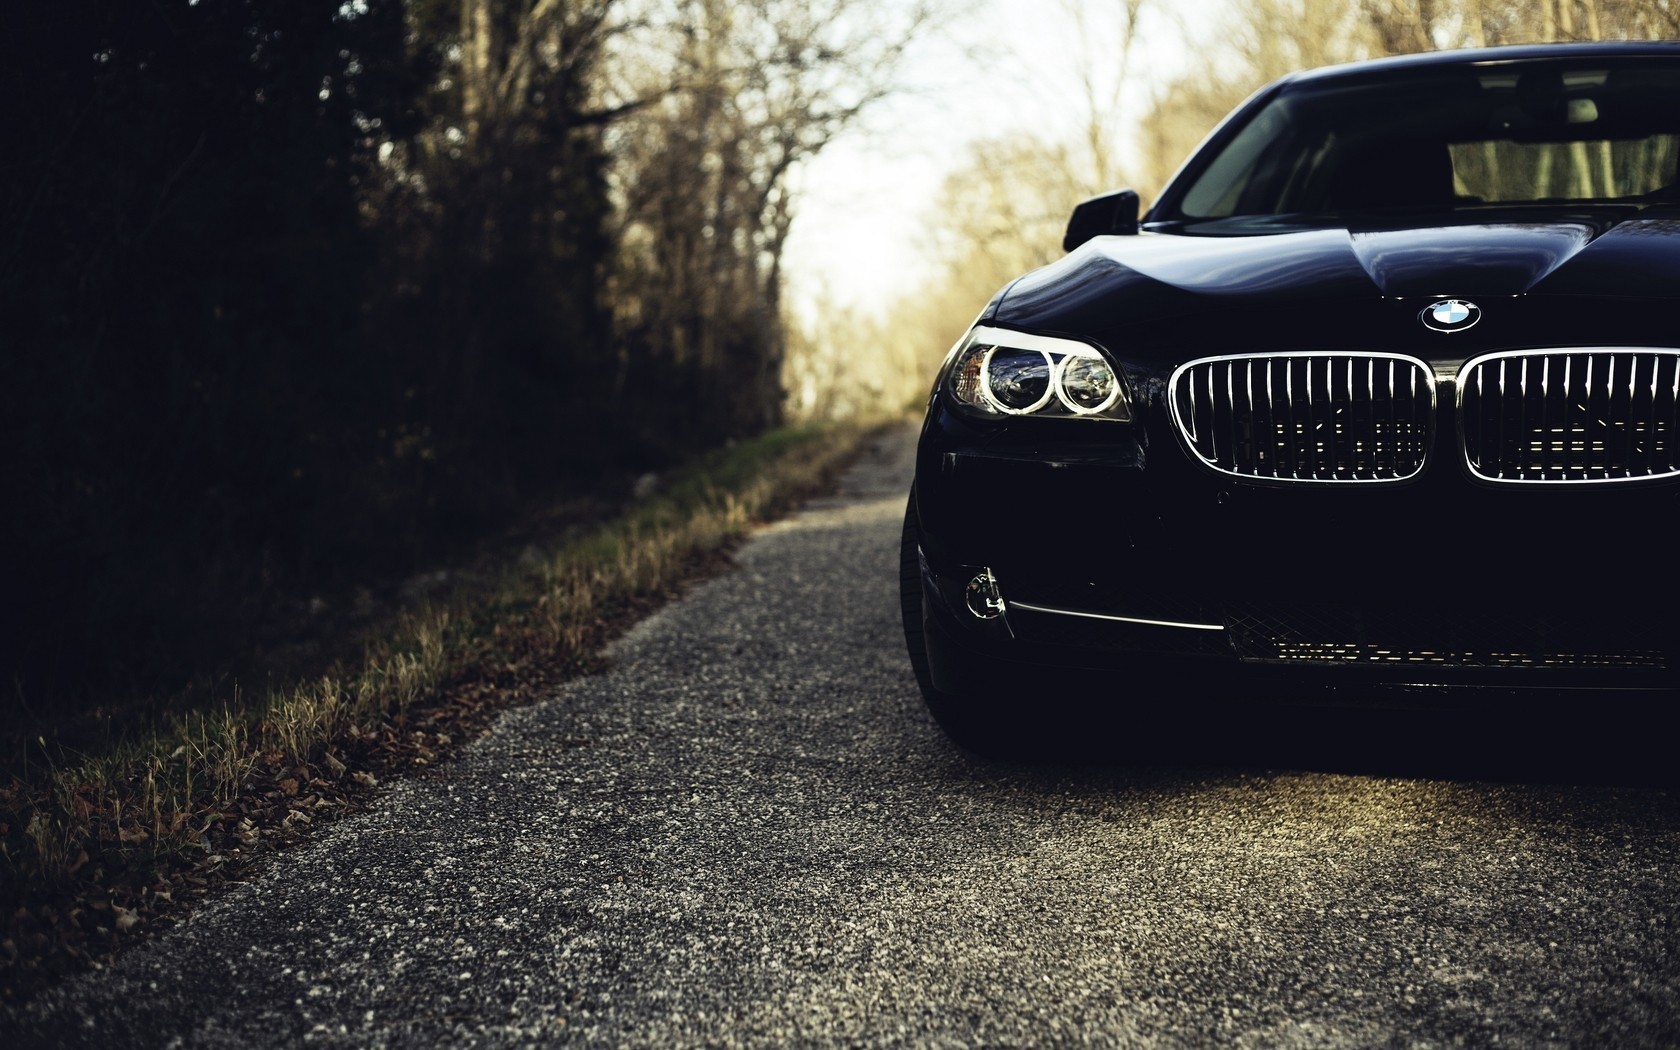 Car Bmw Wallpapers